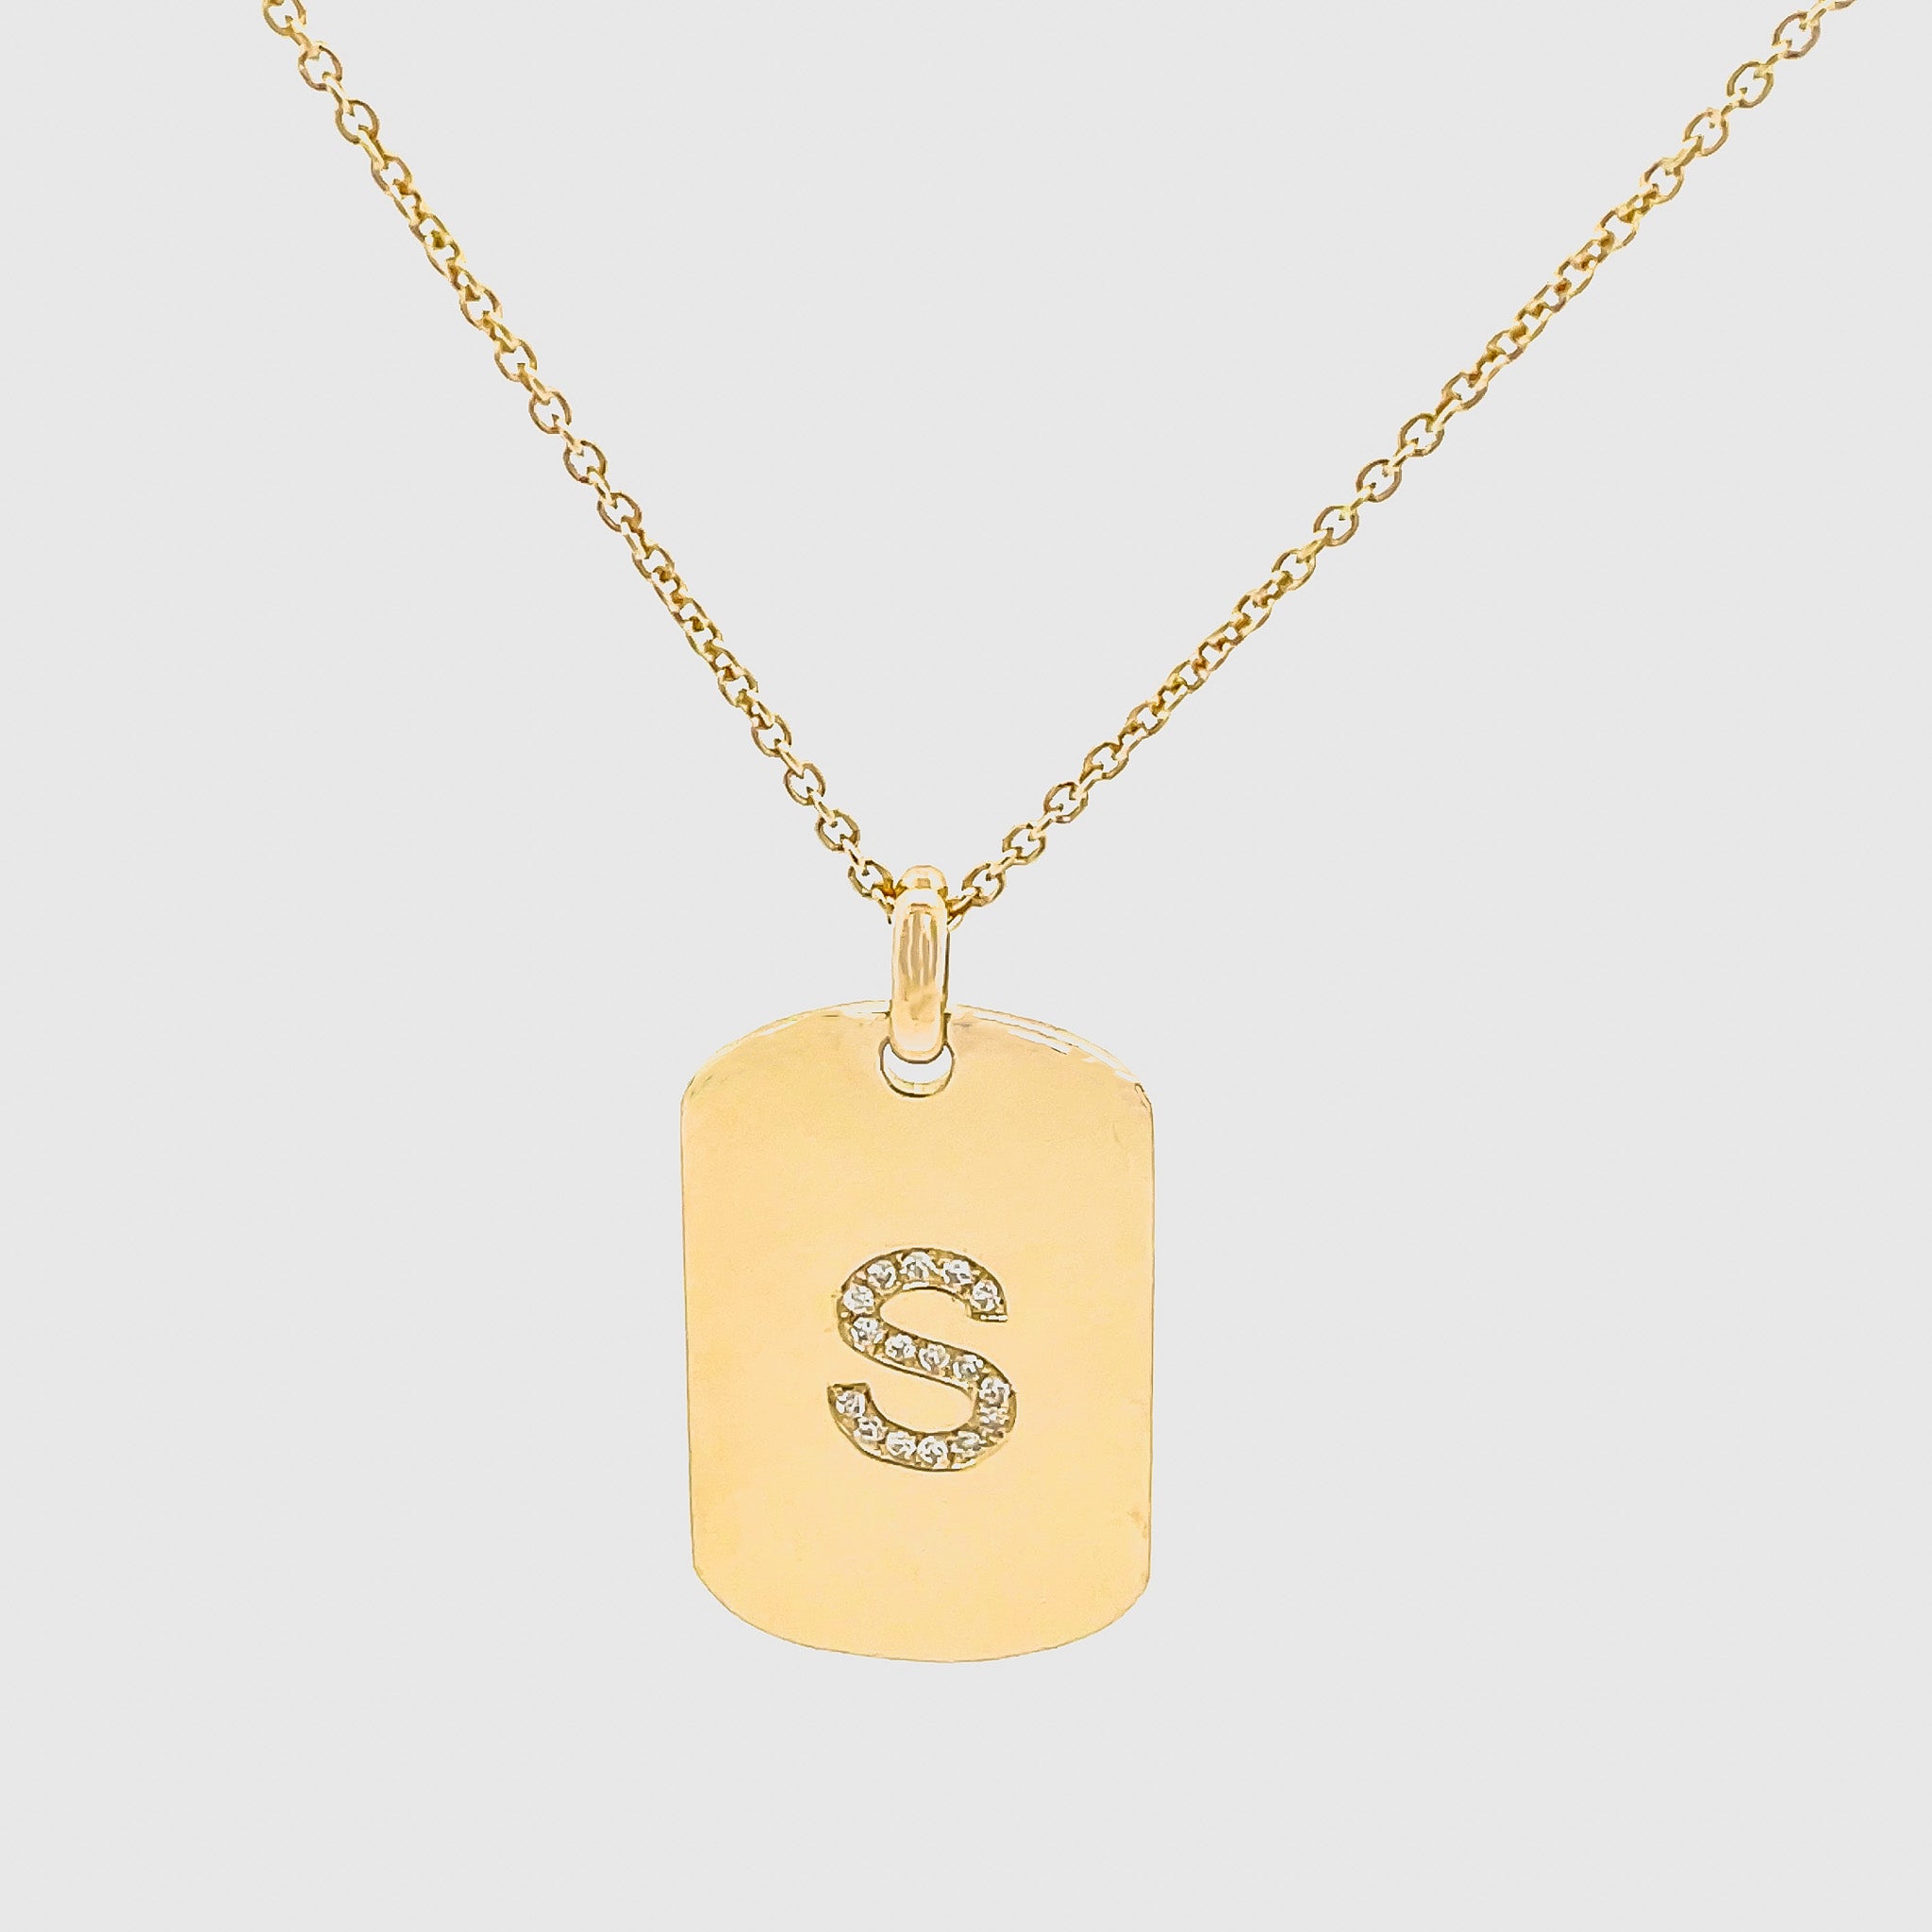 Diamond Initial Necklace 14K Yellow Gold / 16' - 18 Adjustable +$25